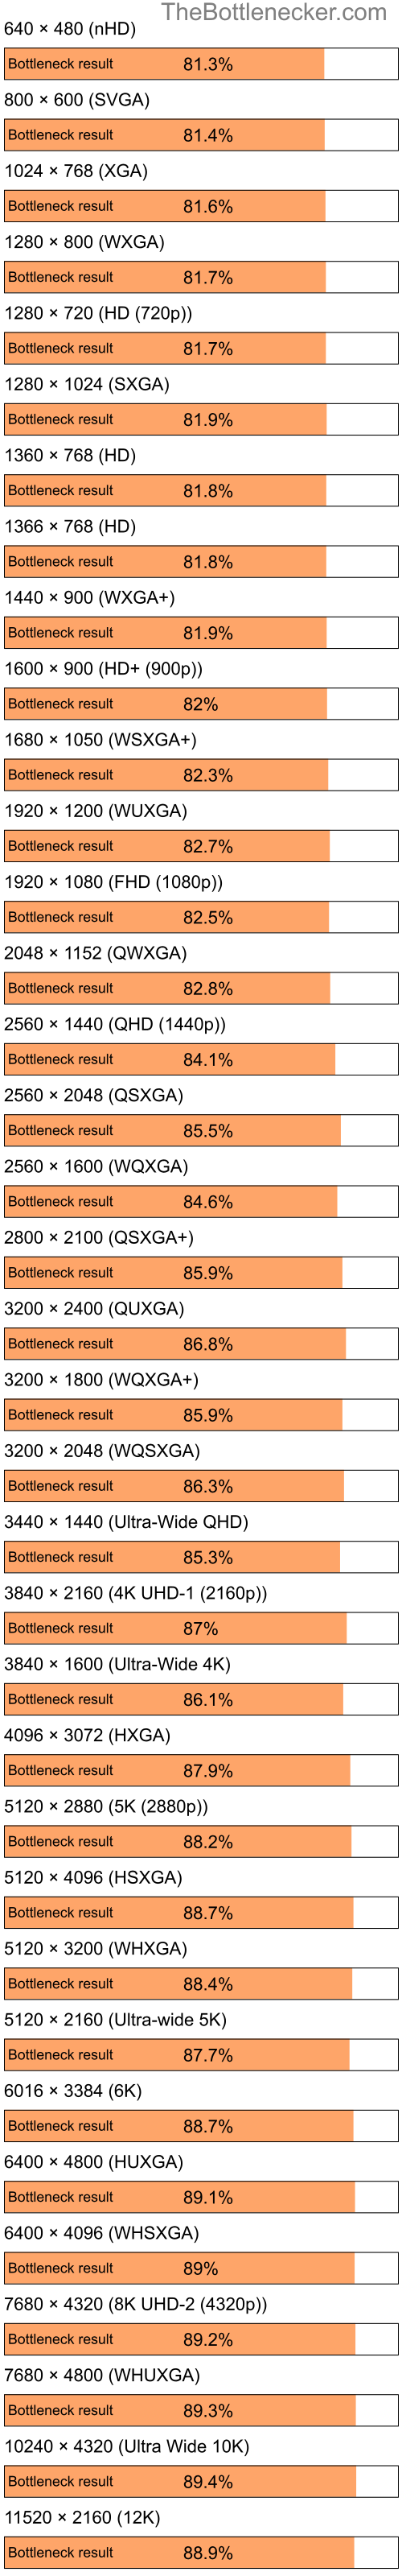 Bottleneck results by resolution for Intel Celeron M 410 and NVIDIA GeForce 7025 in Graphic Card Intense Tasks